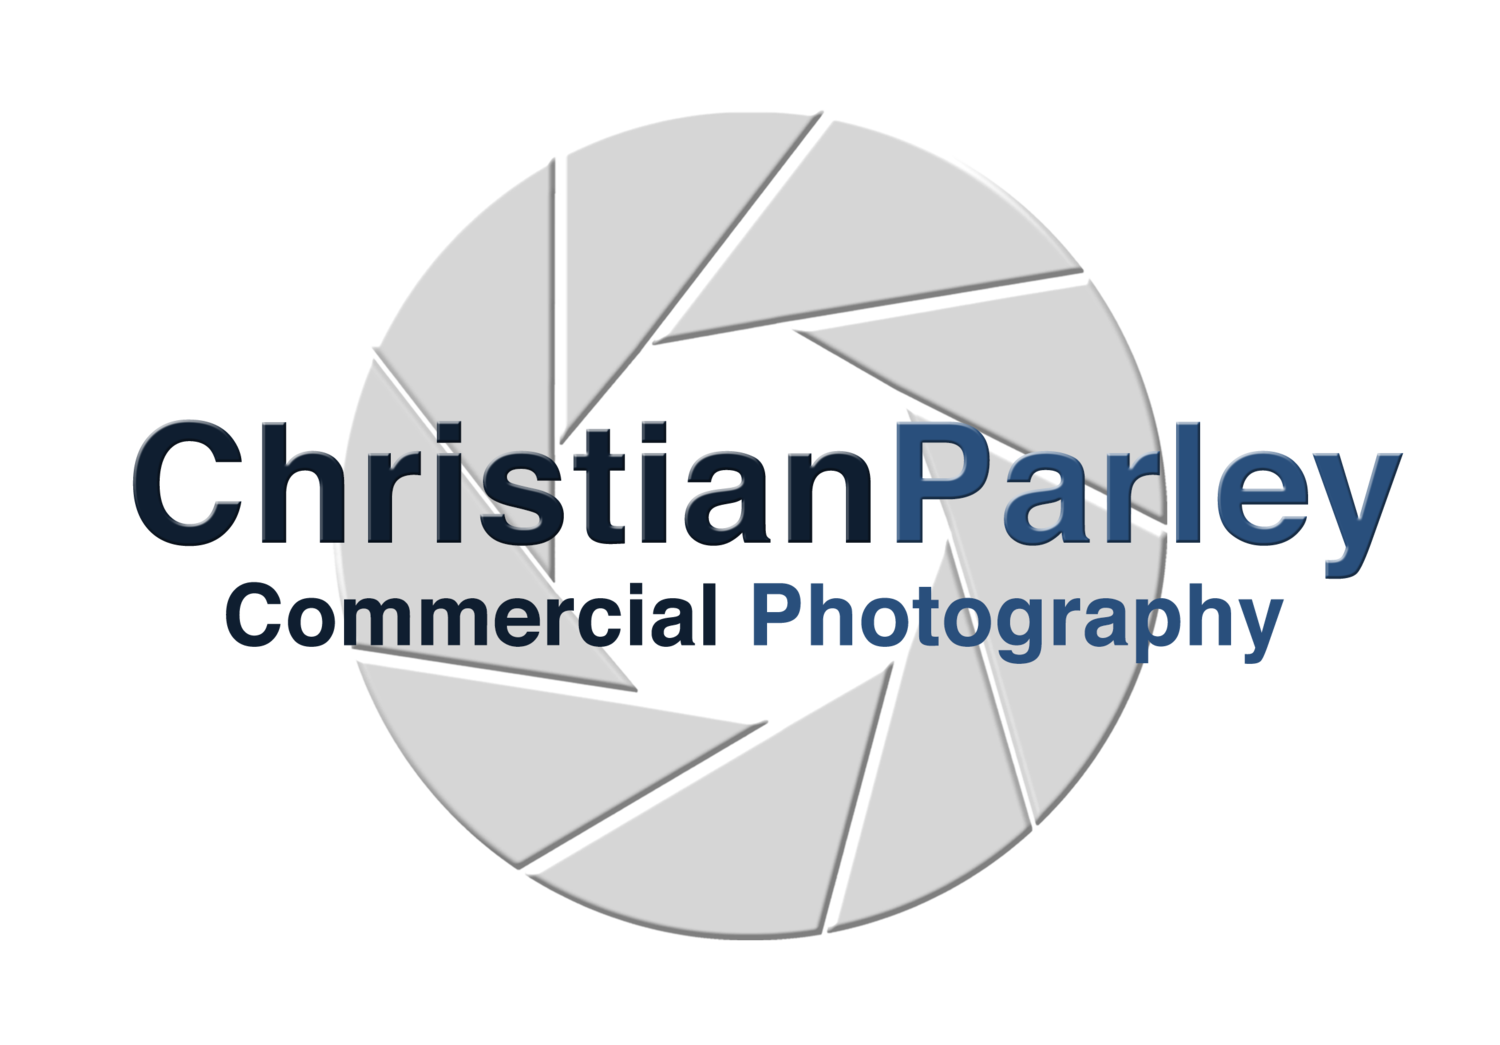 Christian Parley Commercial Photography